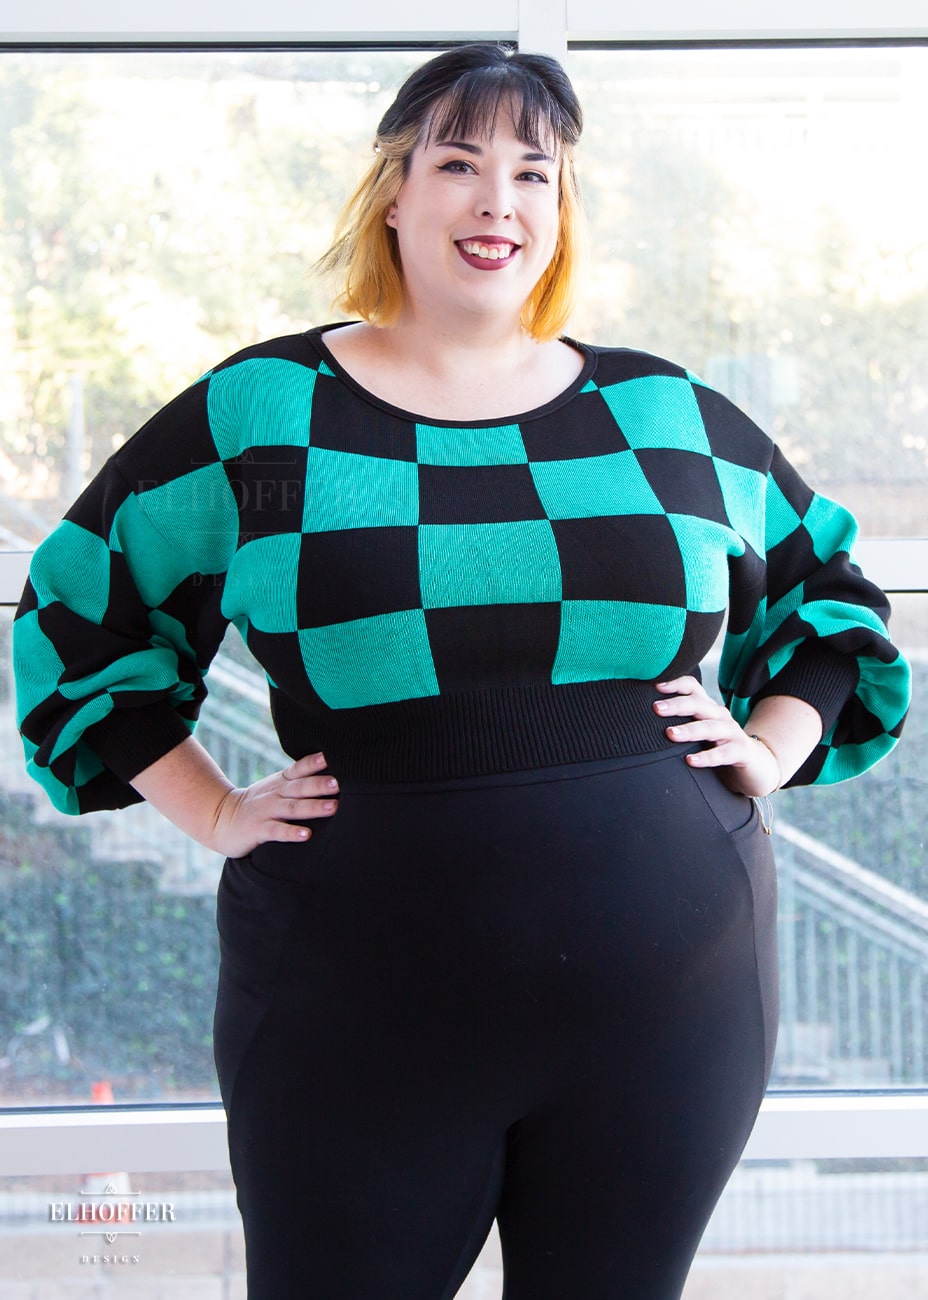 Katie Lynn, a fair skinned 2xl model with short black and blonde hair, is smiling while wearing a cropped oversize sweater with a black and green chessboard pattern and long billowing sleeves. She paired the sweater with black leggings.